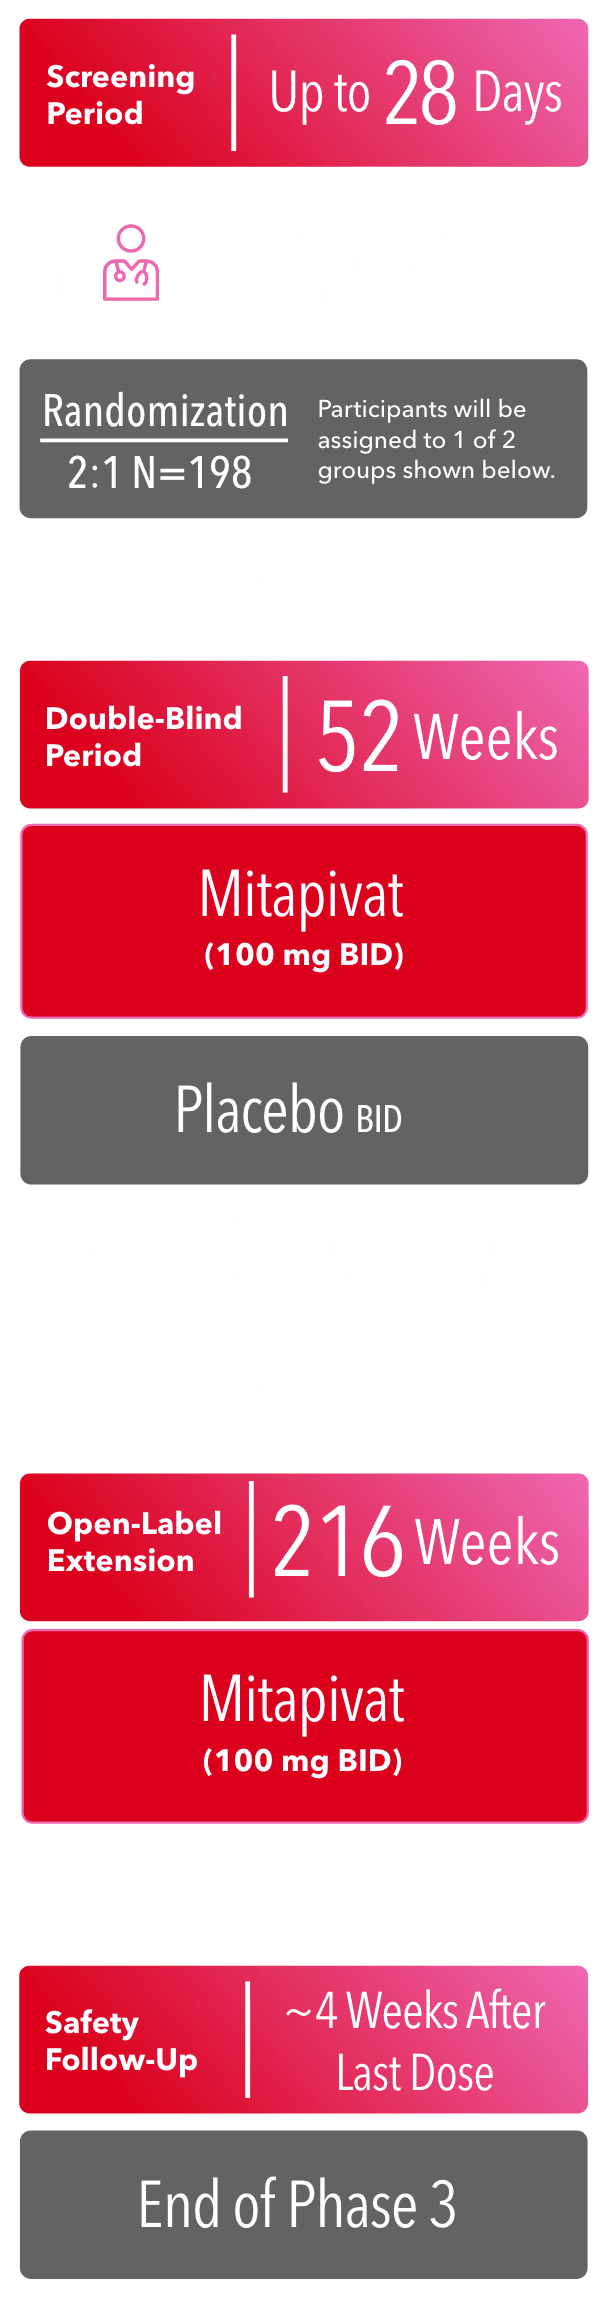 Phase 3 screening period up to 28 days, 52-week double-blind period, primary endpoints, 216-week open-label extension period, and safety follow-up around 4 weeks after last dose